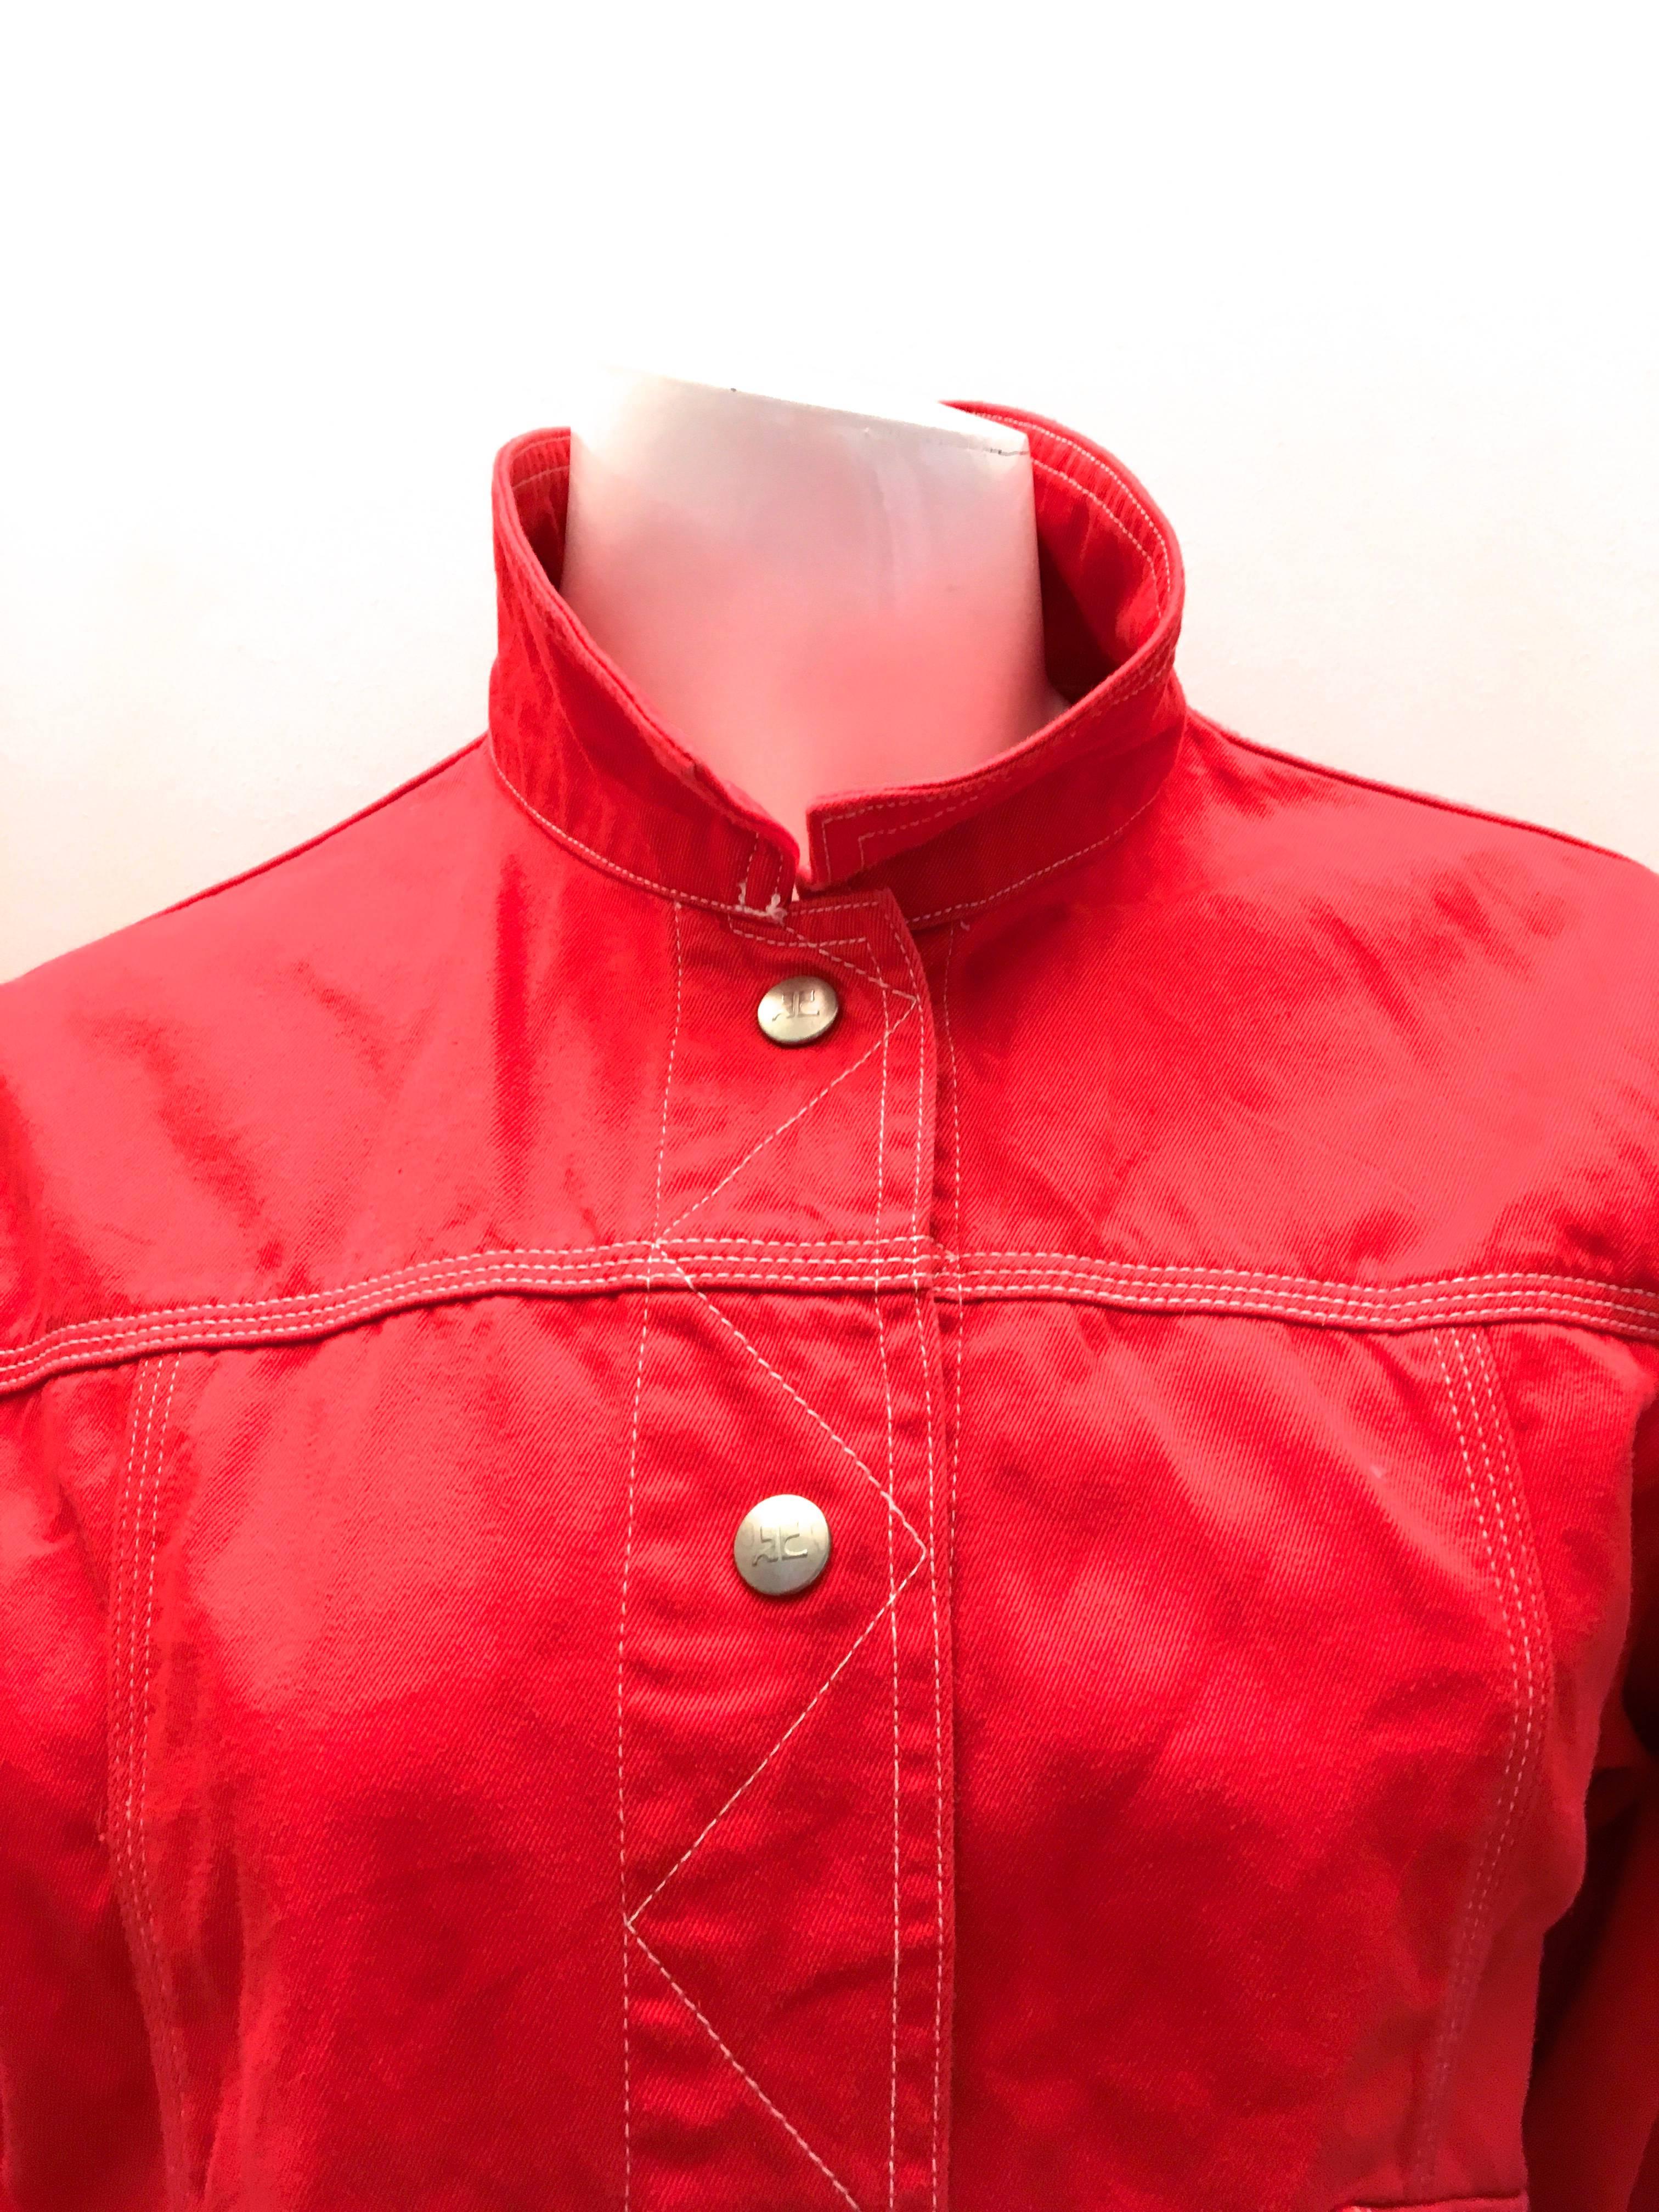 Courreges Jacket - 100% Cotton -Late 1970's In Excellent Condition For Sale In Boca Raton, FL